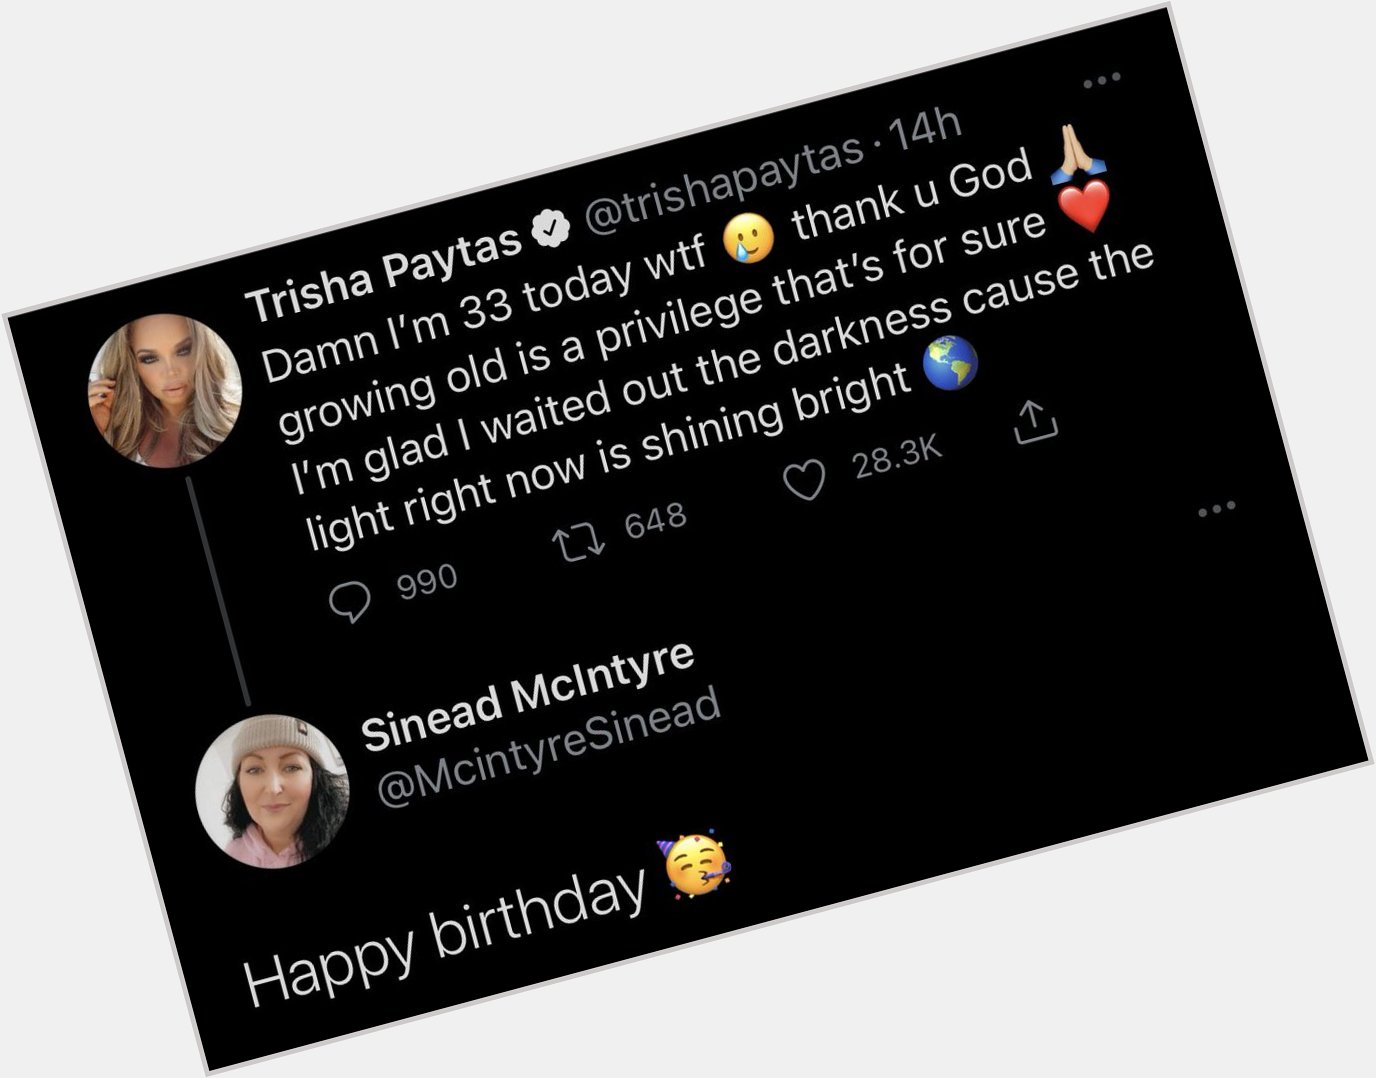 My mother wishing trisha paytas a happy bday...when worlds collide 